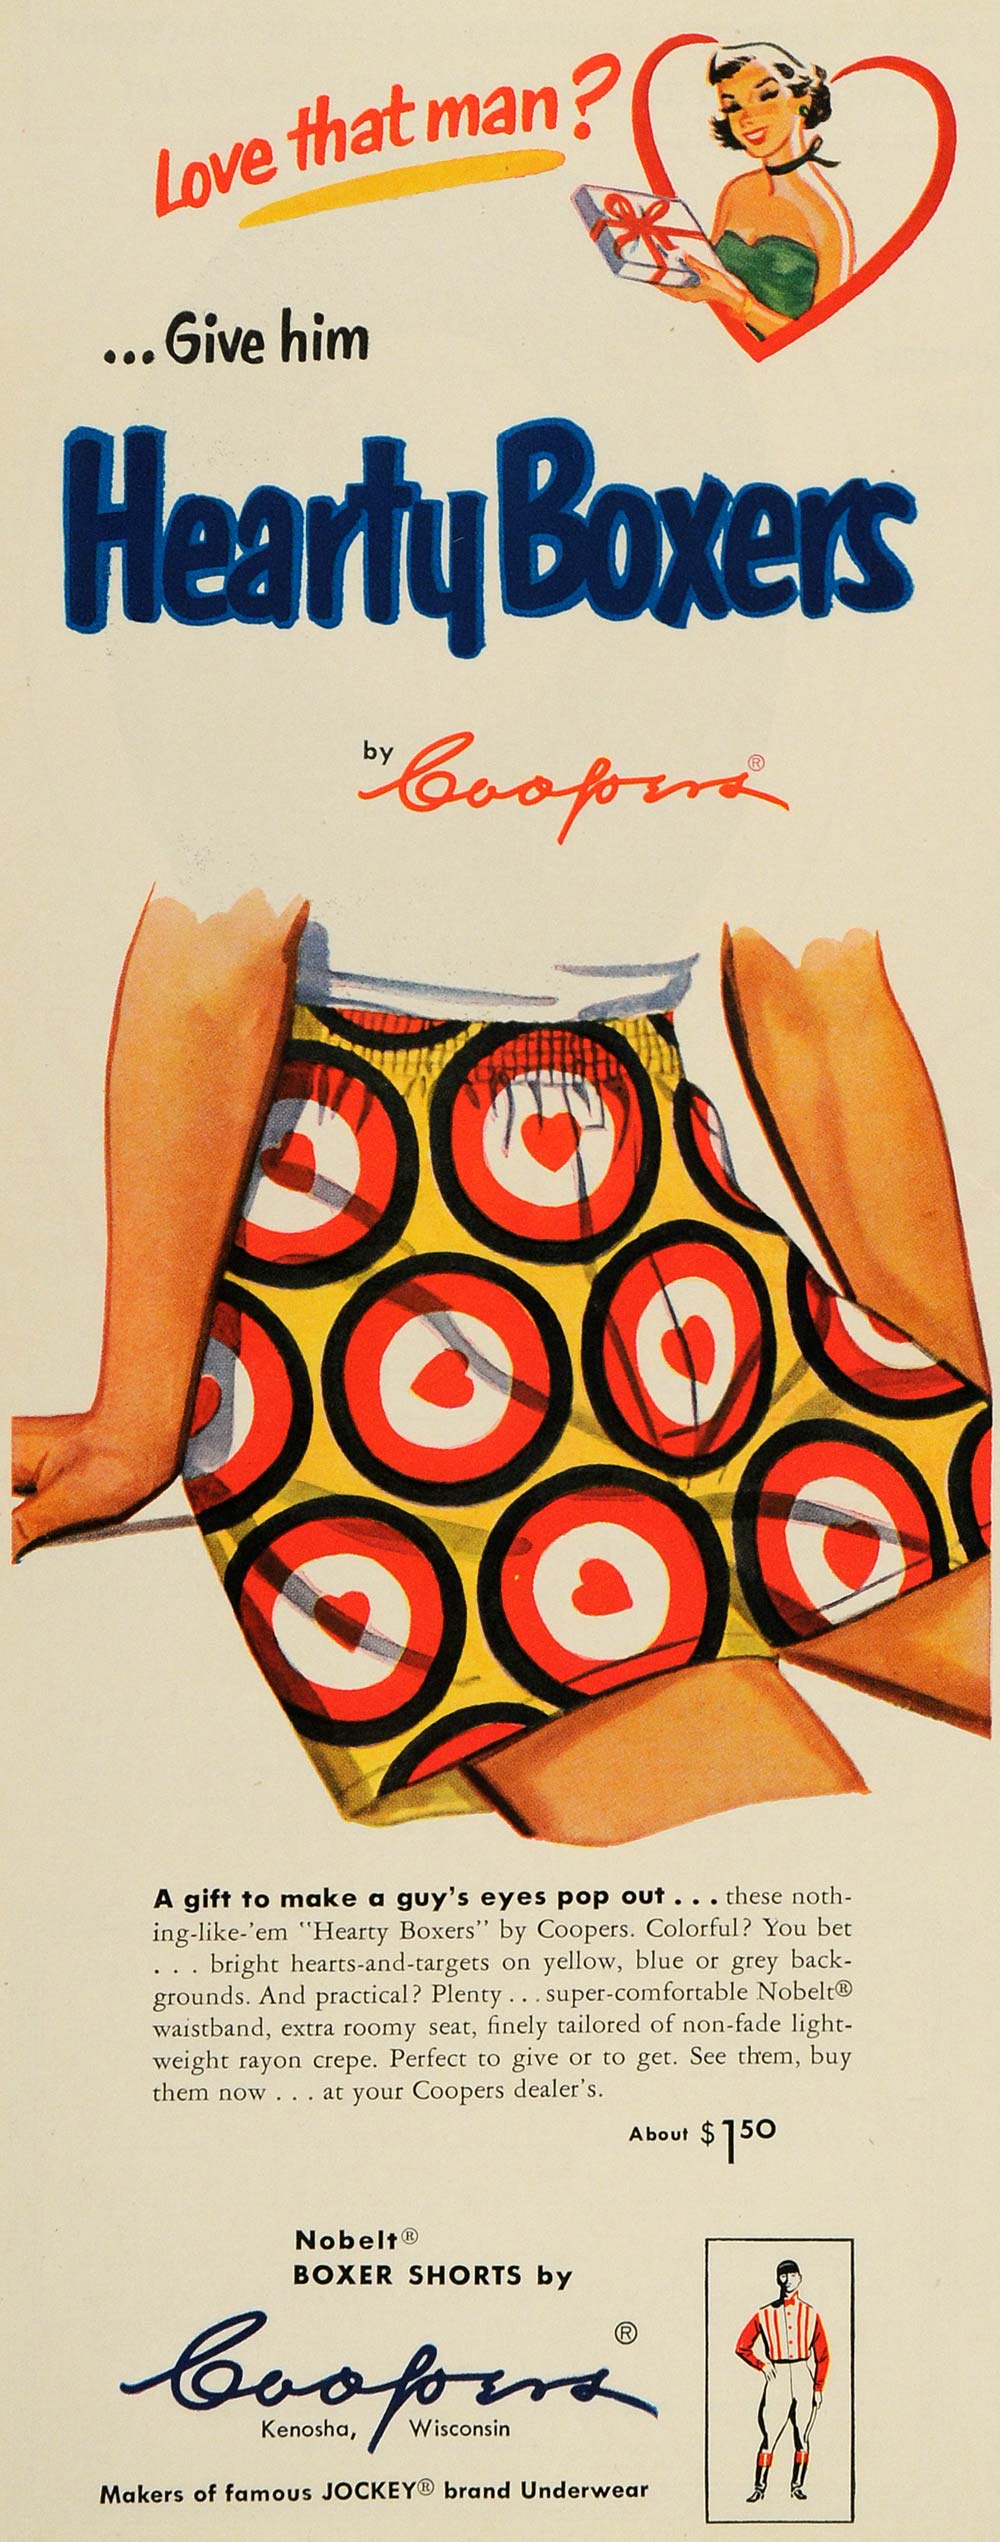 1953 advertisement for Jockey underwear : Free Download, Borrow, and  Streaming : Internet Archive